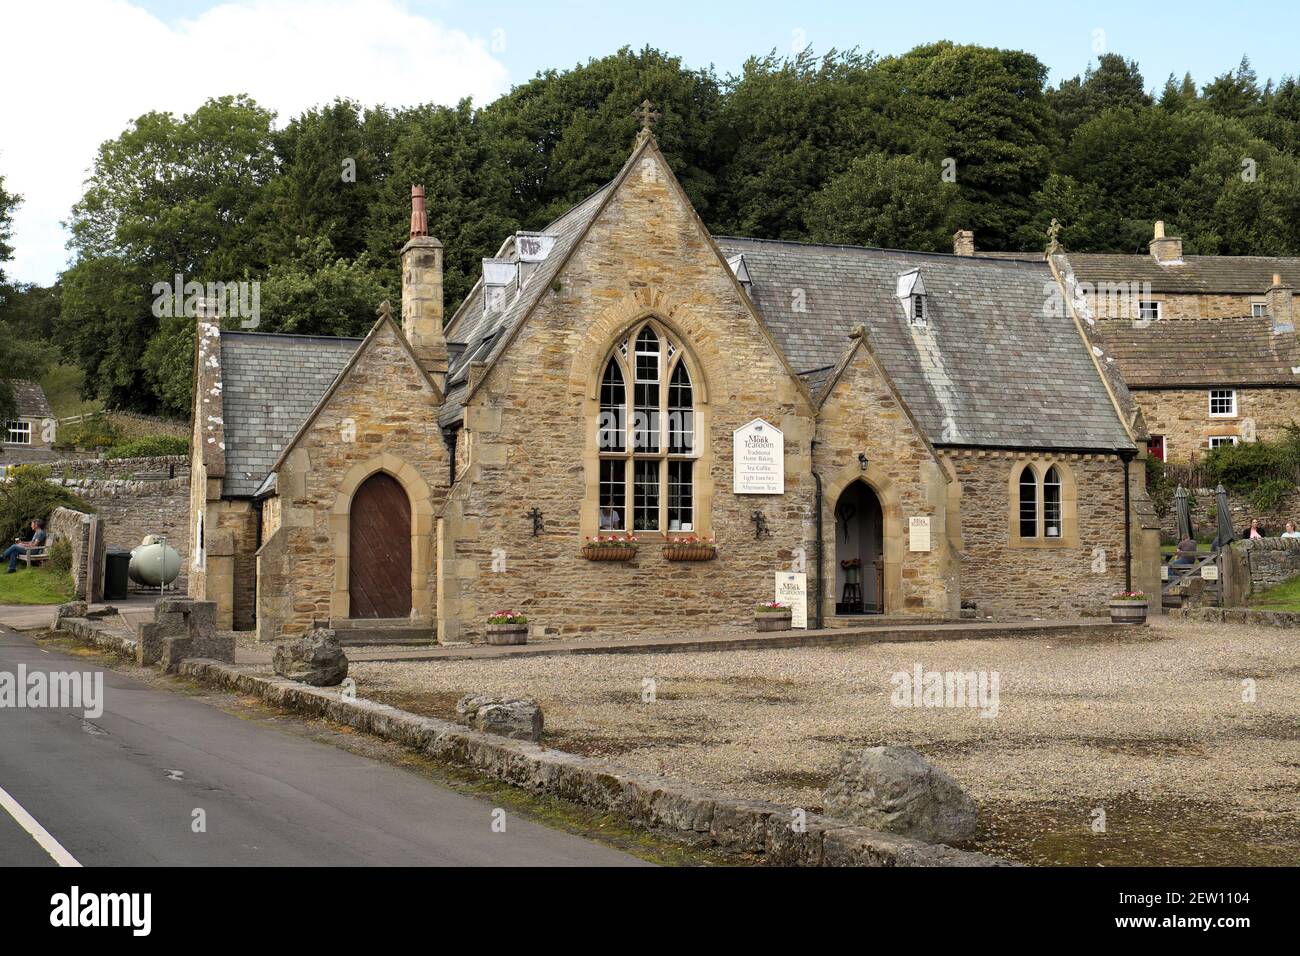 The old school building (now a tearoom), Blancheland, Northumberland, England, UK Stock Photo